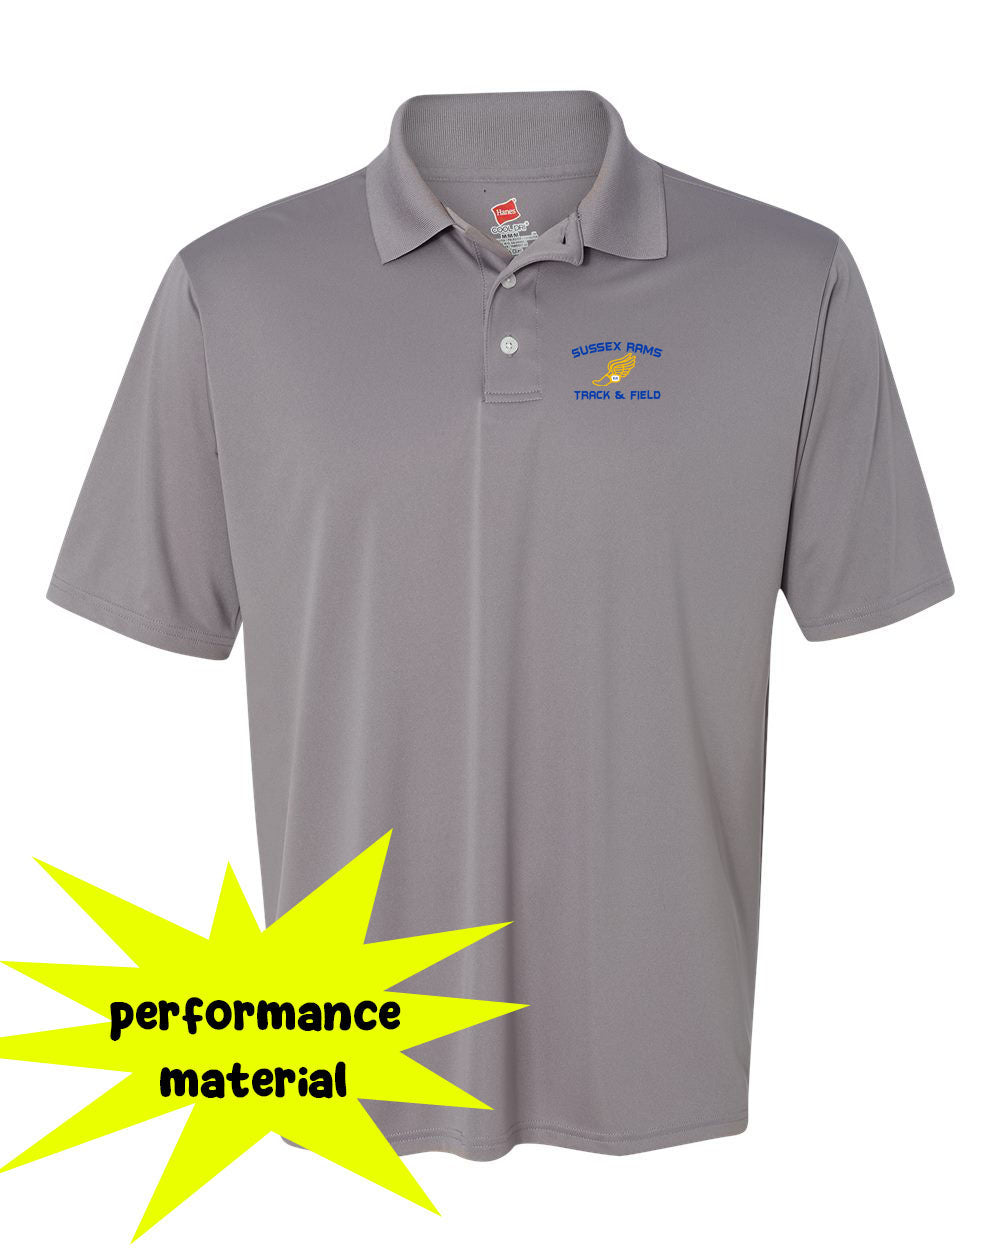 Sussex Rams Track Performance Material Polo T-Shirt Design 2